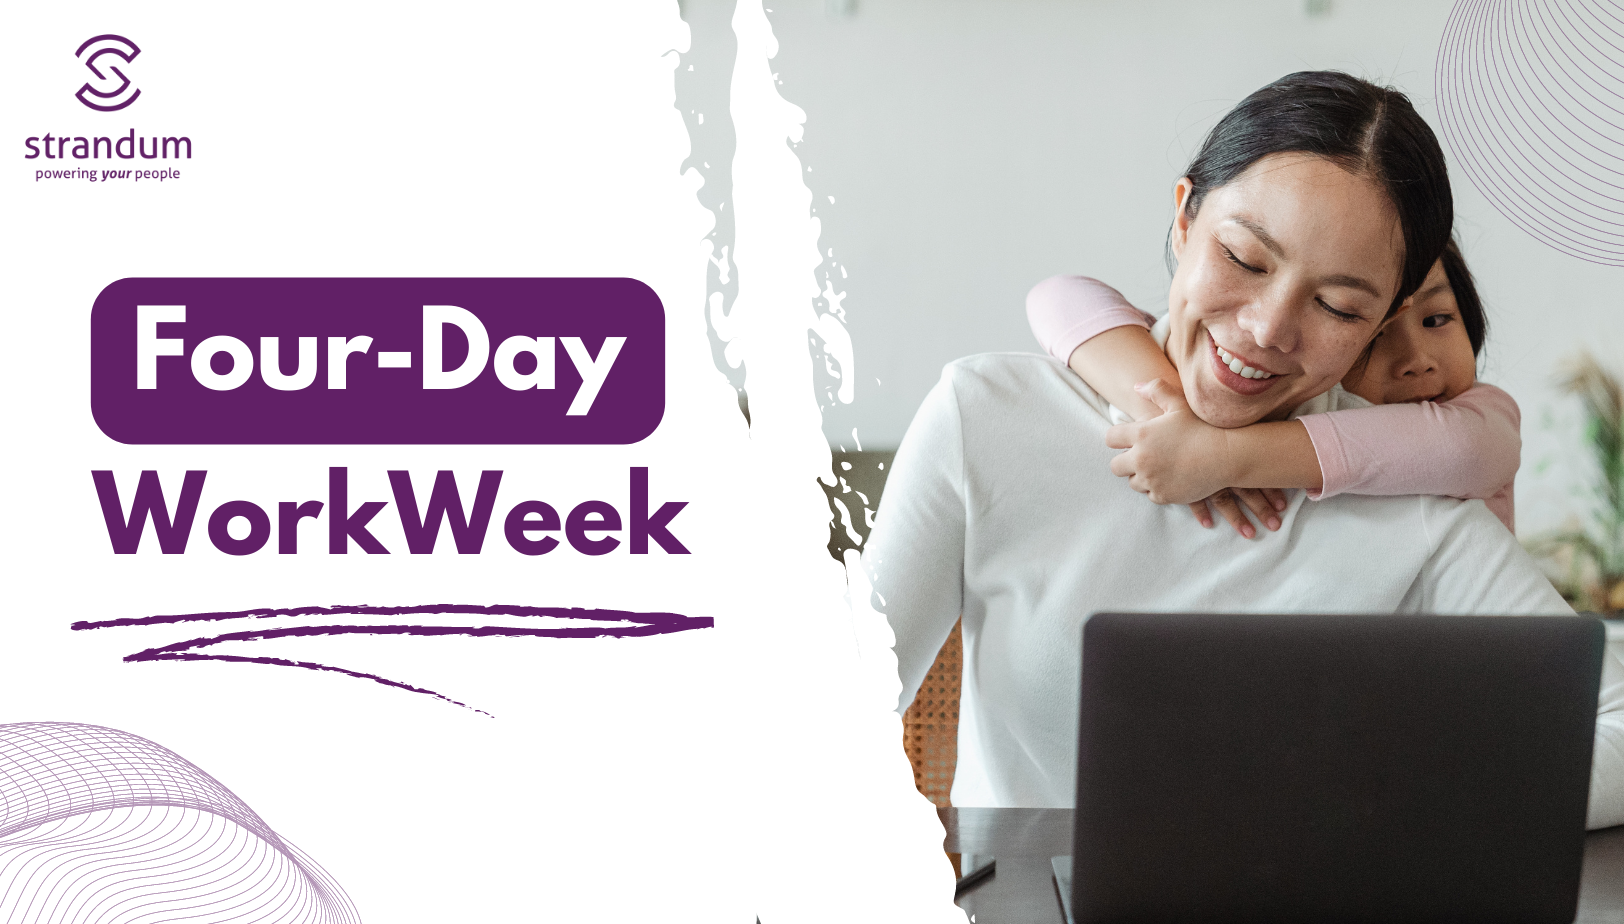 The Four-Day Workweek: Is It Possible With Strandum HRMS?